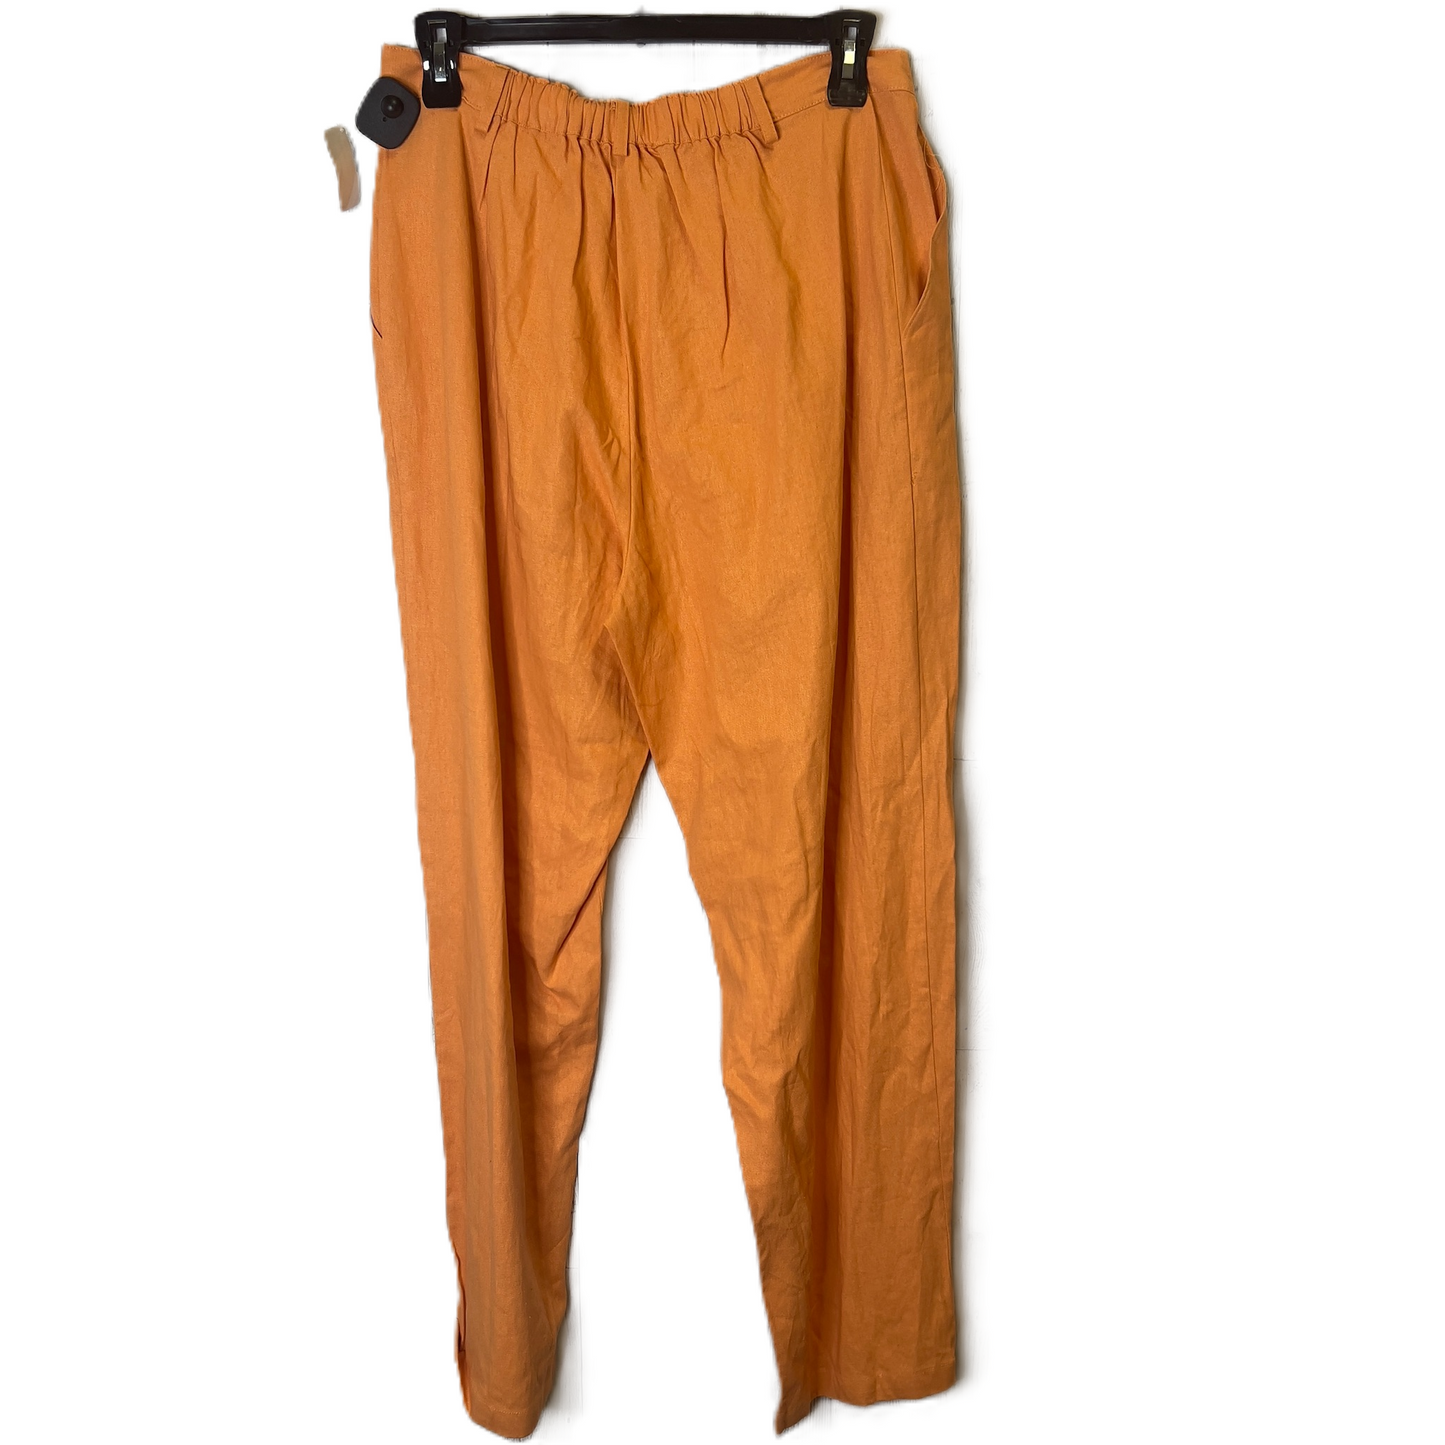 Orange Pants Linen By And Now This, Size: 1x